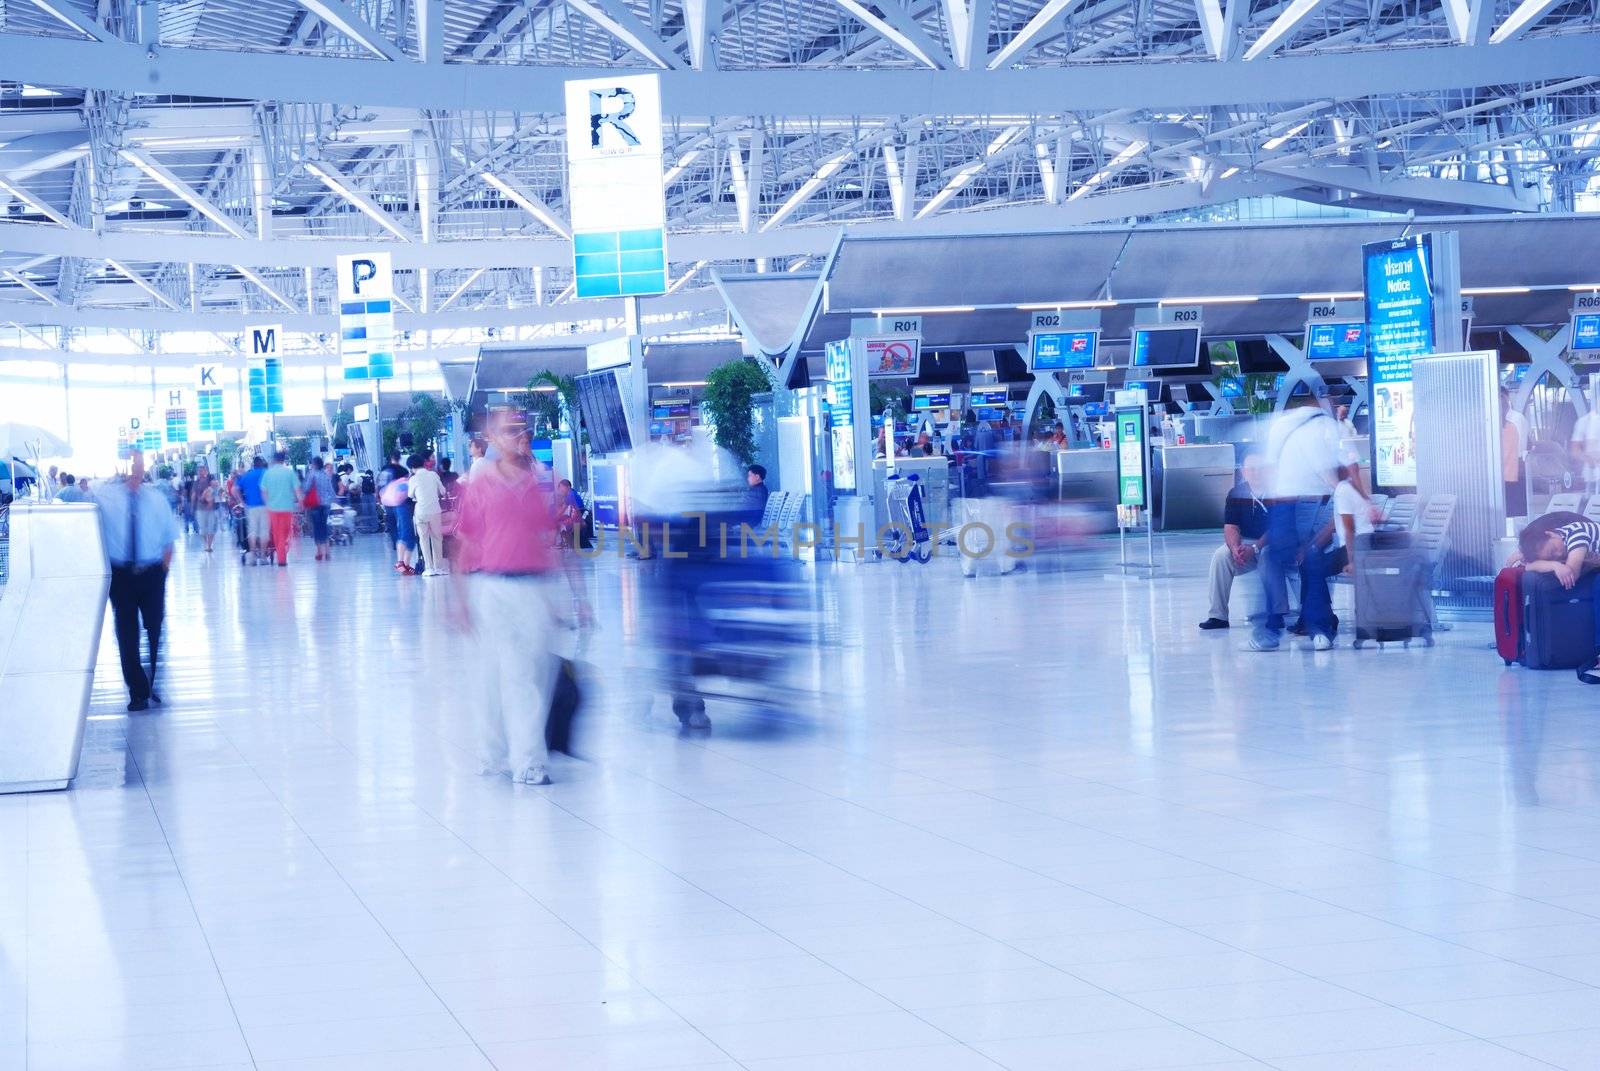 People in airport. Blurred. No recognizable faces or brandnames.